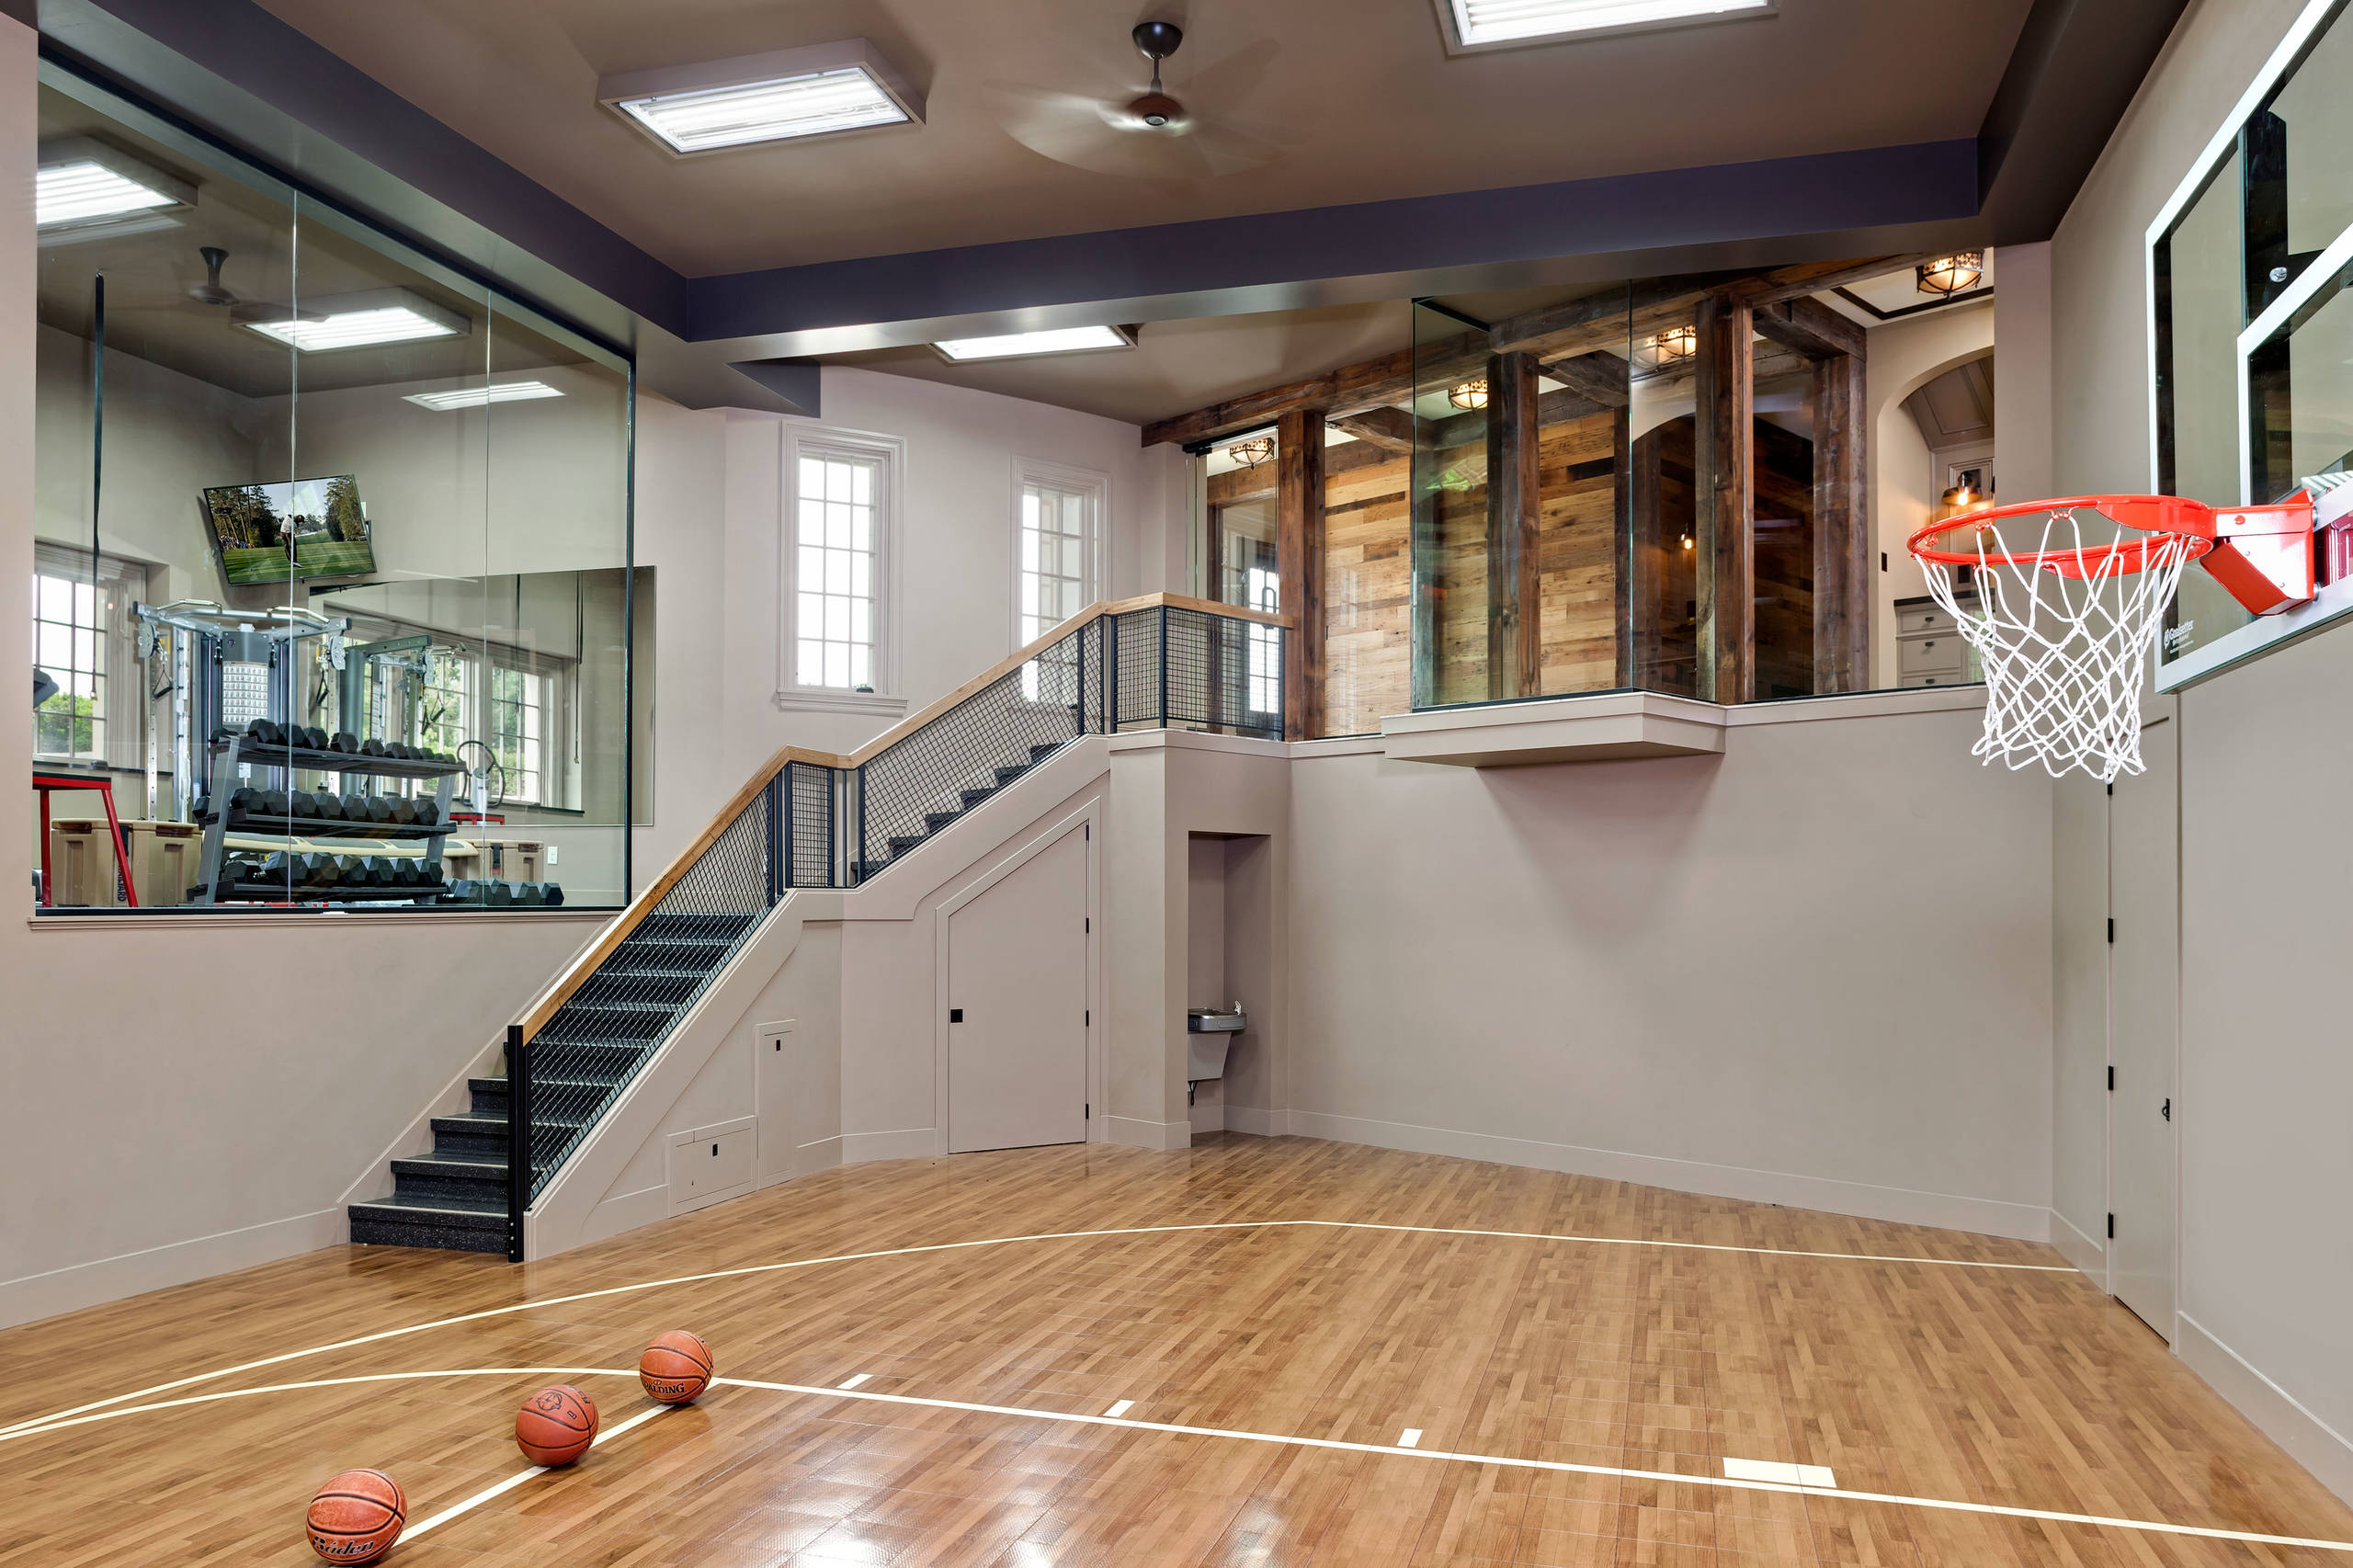 75 Traditional Indoor Sport Court Ideas You'll Love - October, 2022 | Houzz